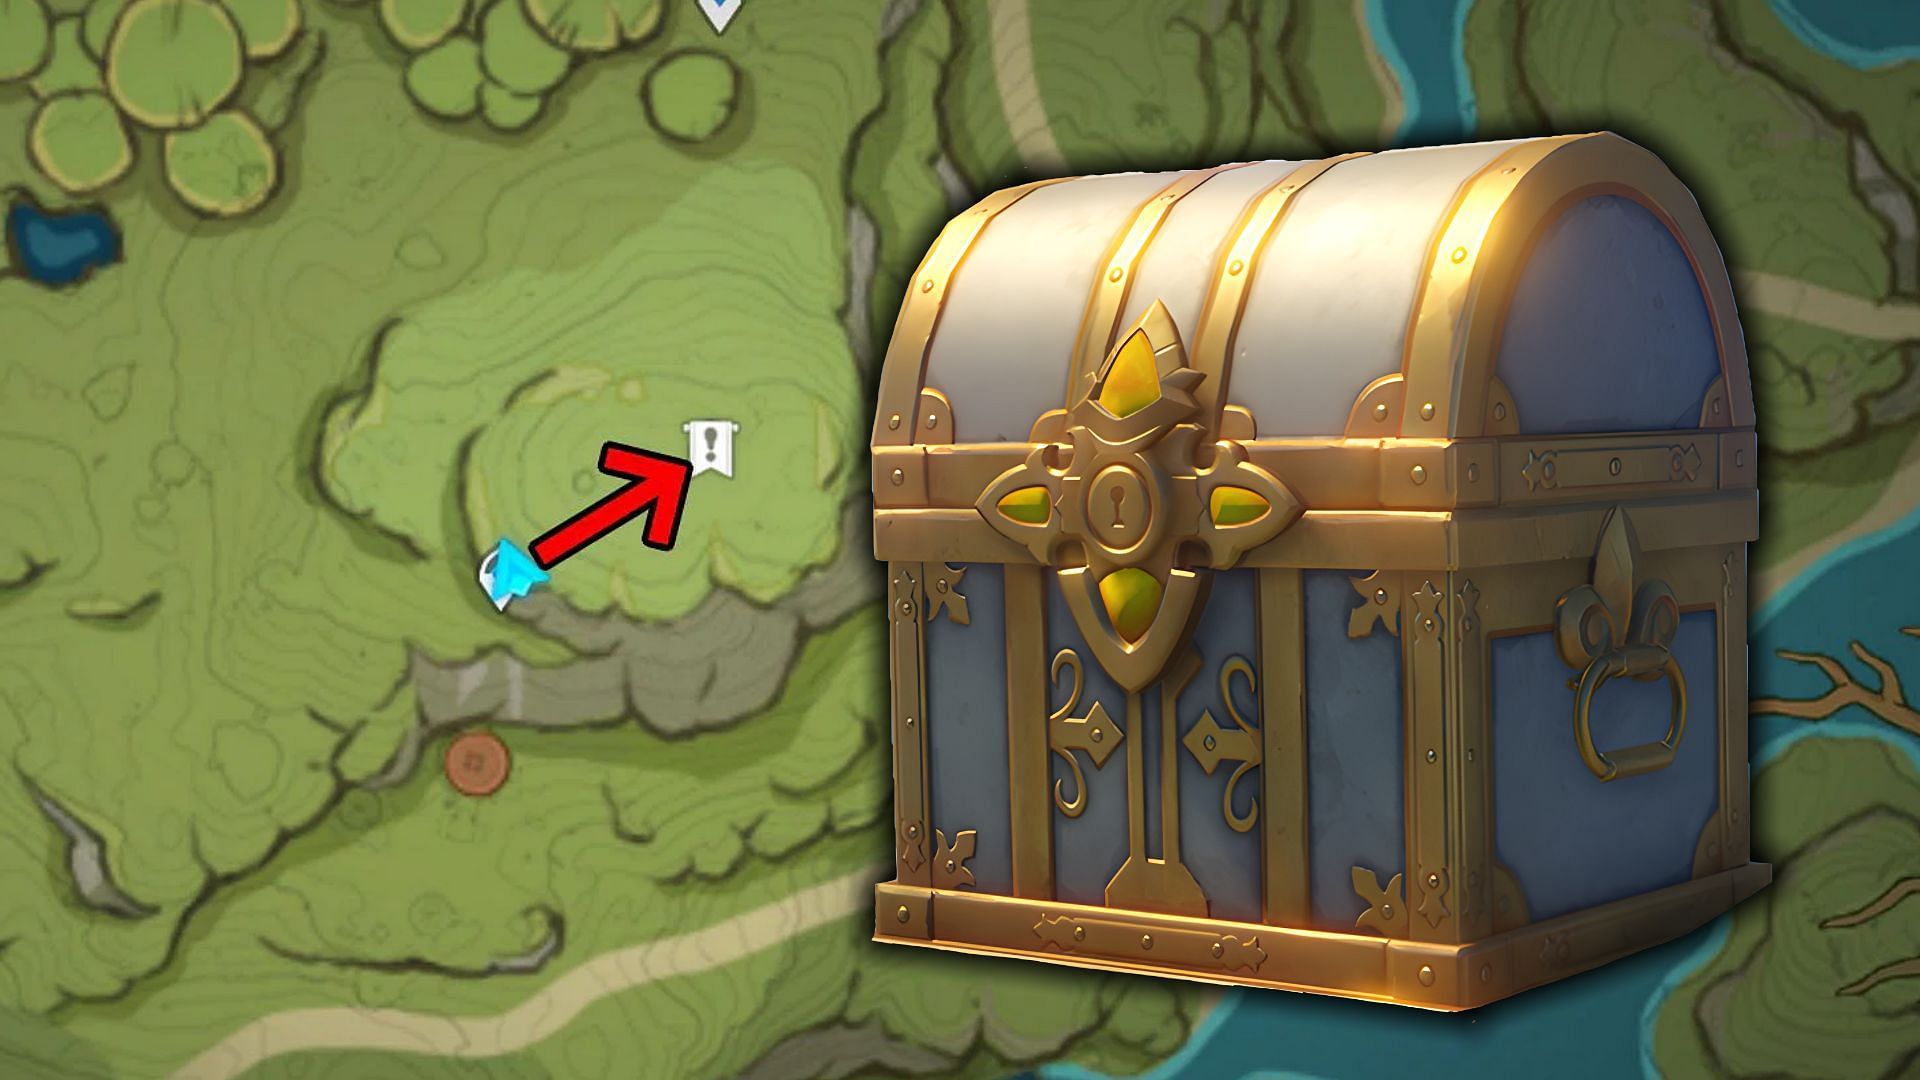 There are plenty of chests to collect here